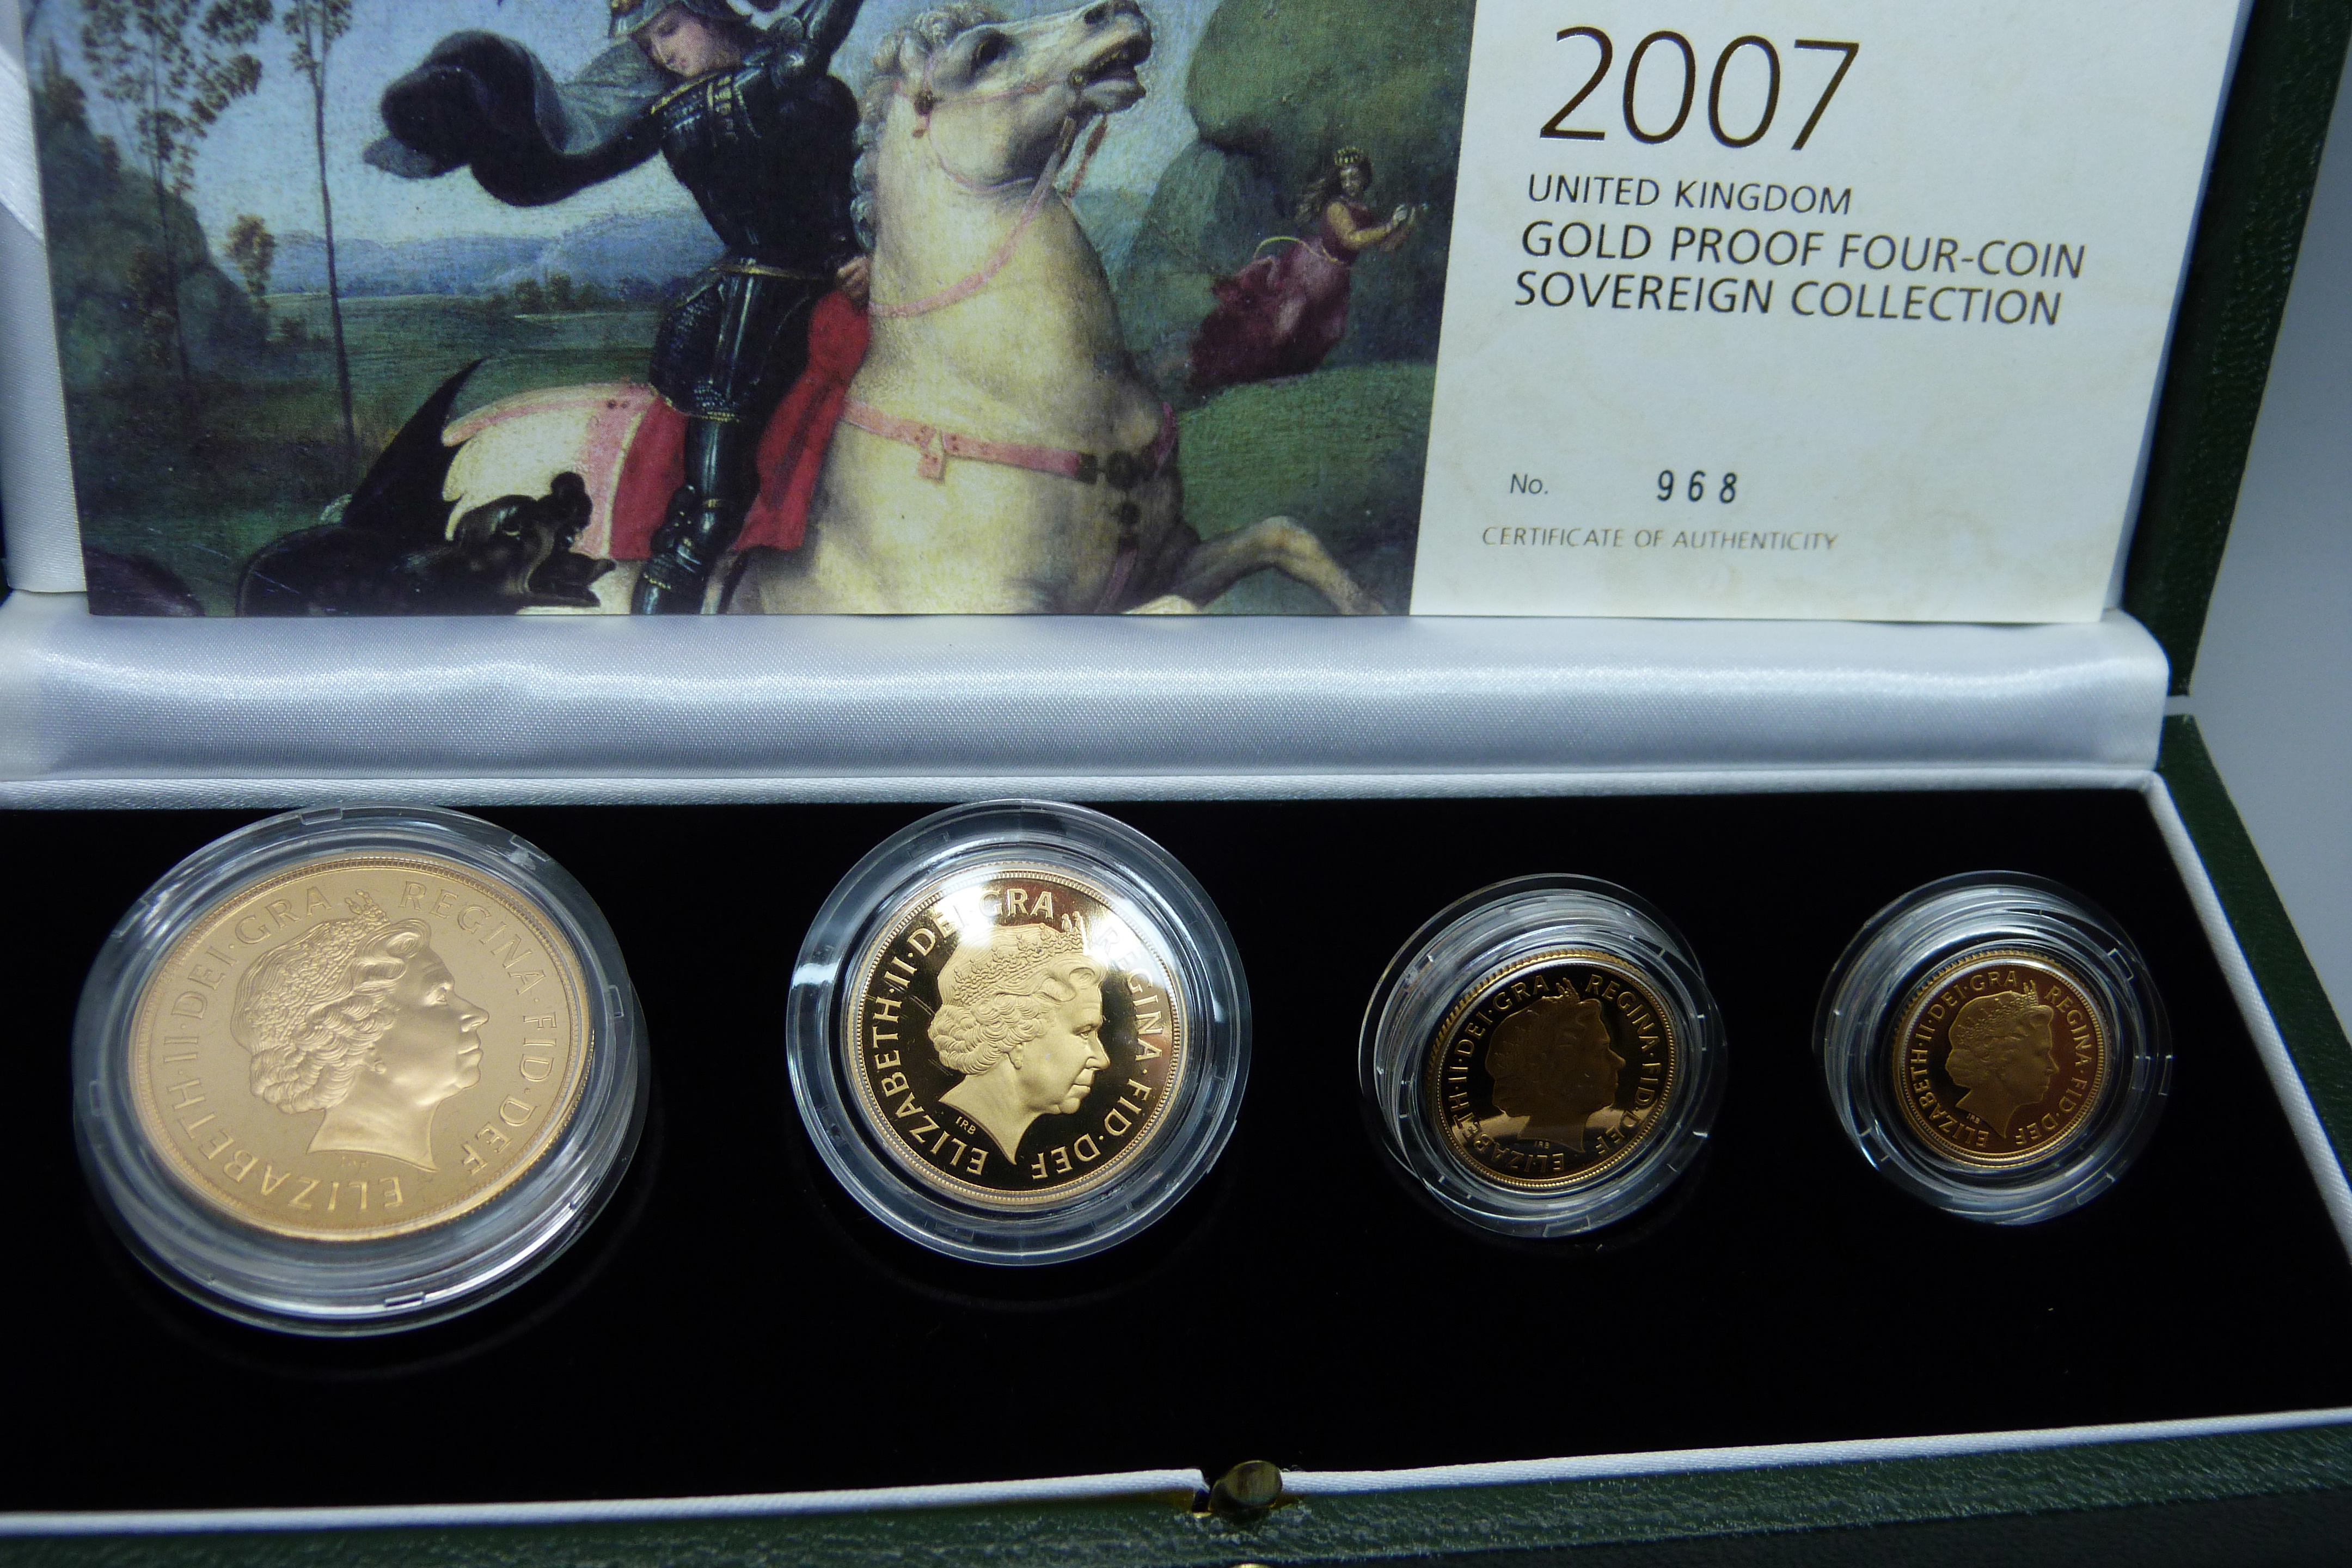 The Royal Mint 2007 UK gold proof four-coin sovereign collection, no. 968 - Image 5 of 7